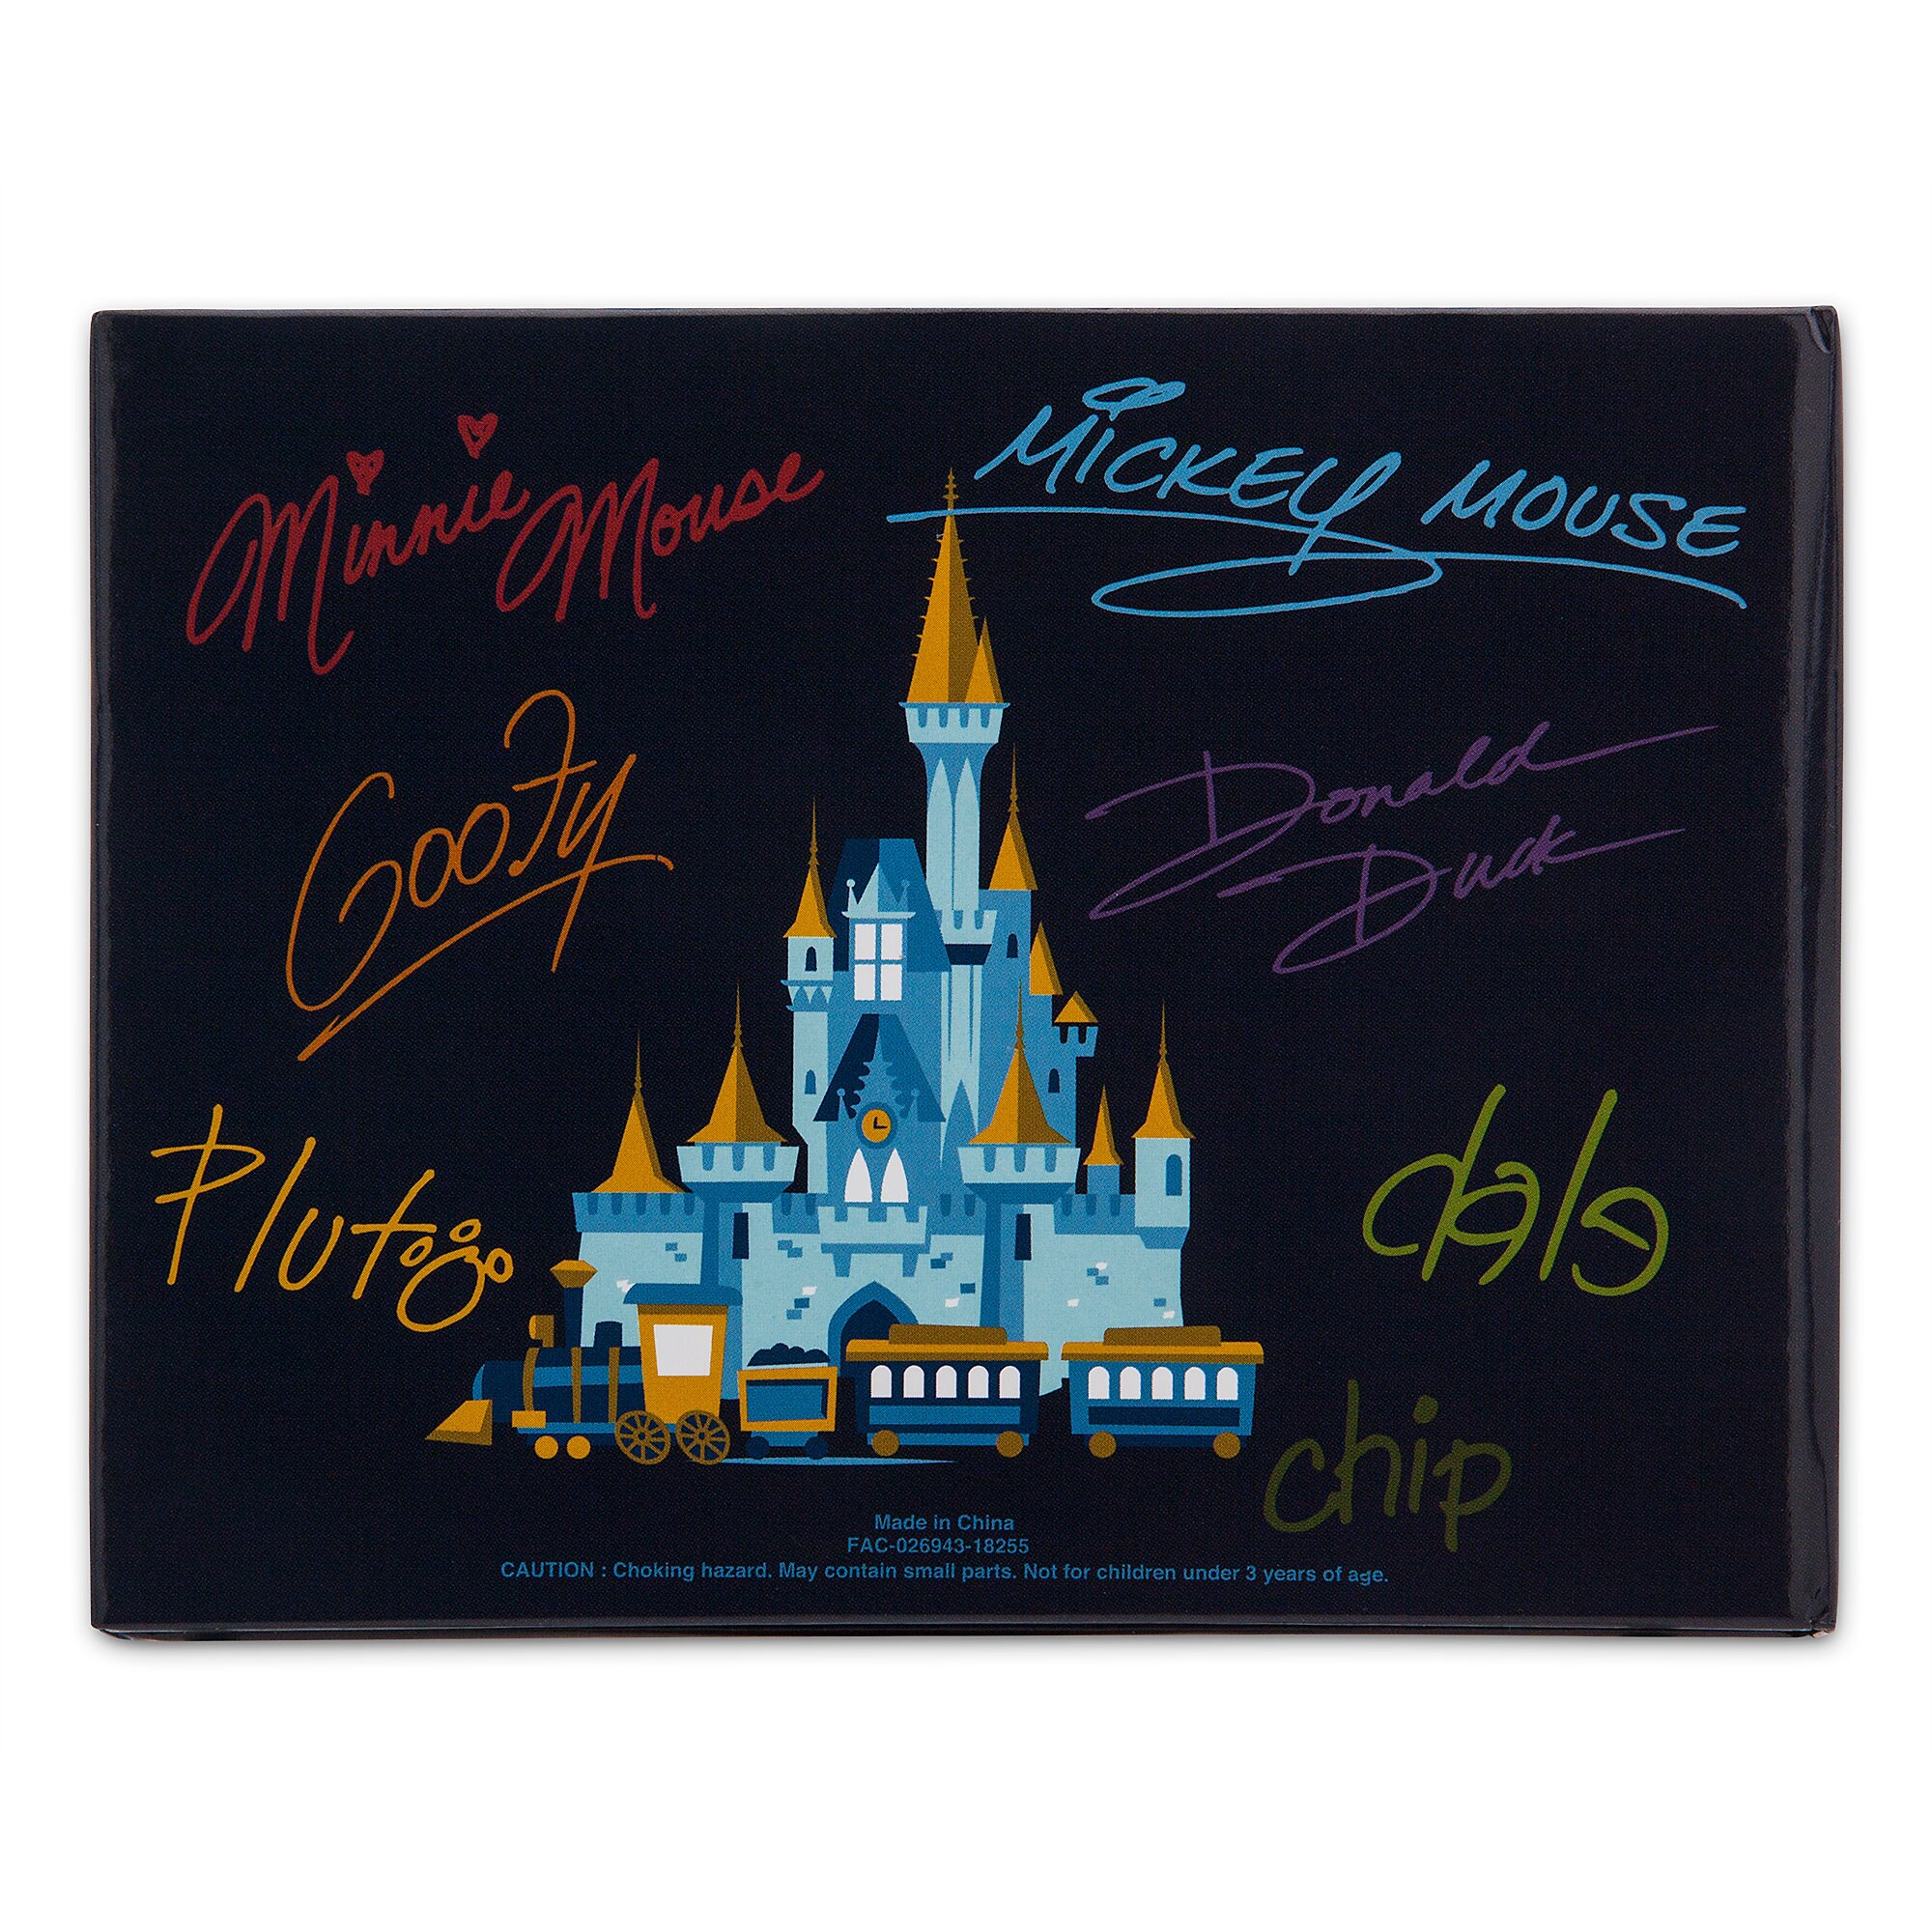 Mickey Mouse and Friends Autograph Book - Walt Disney World